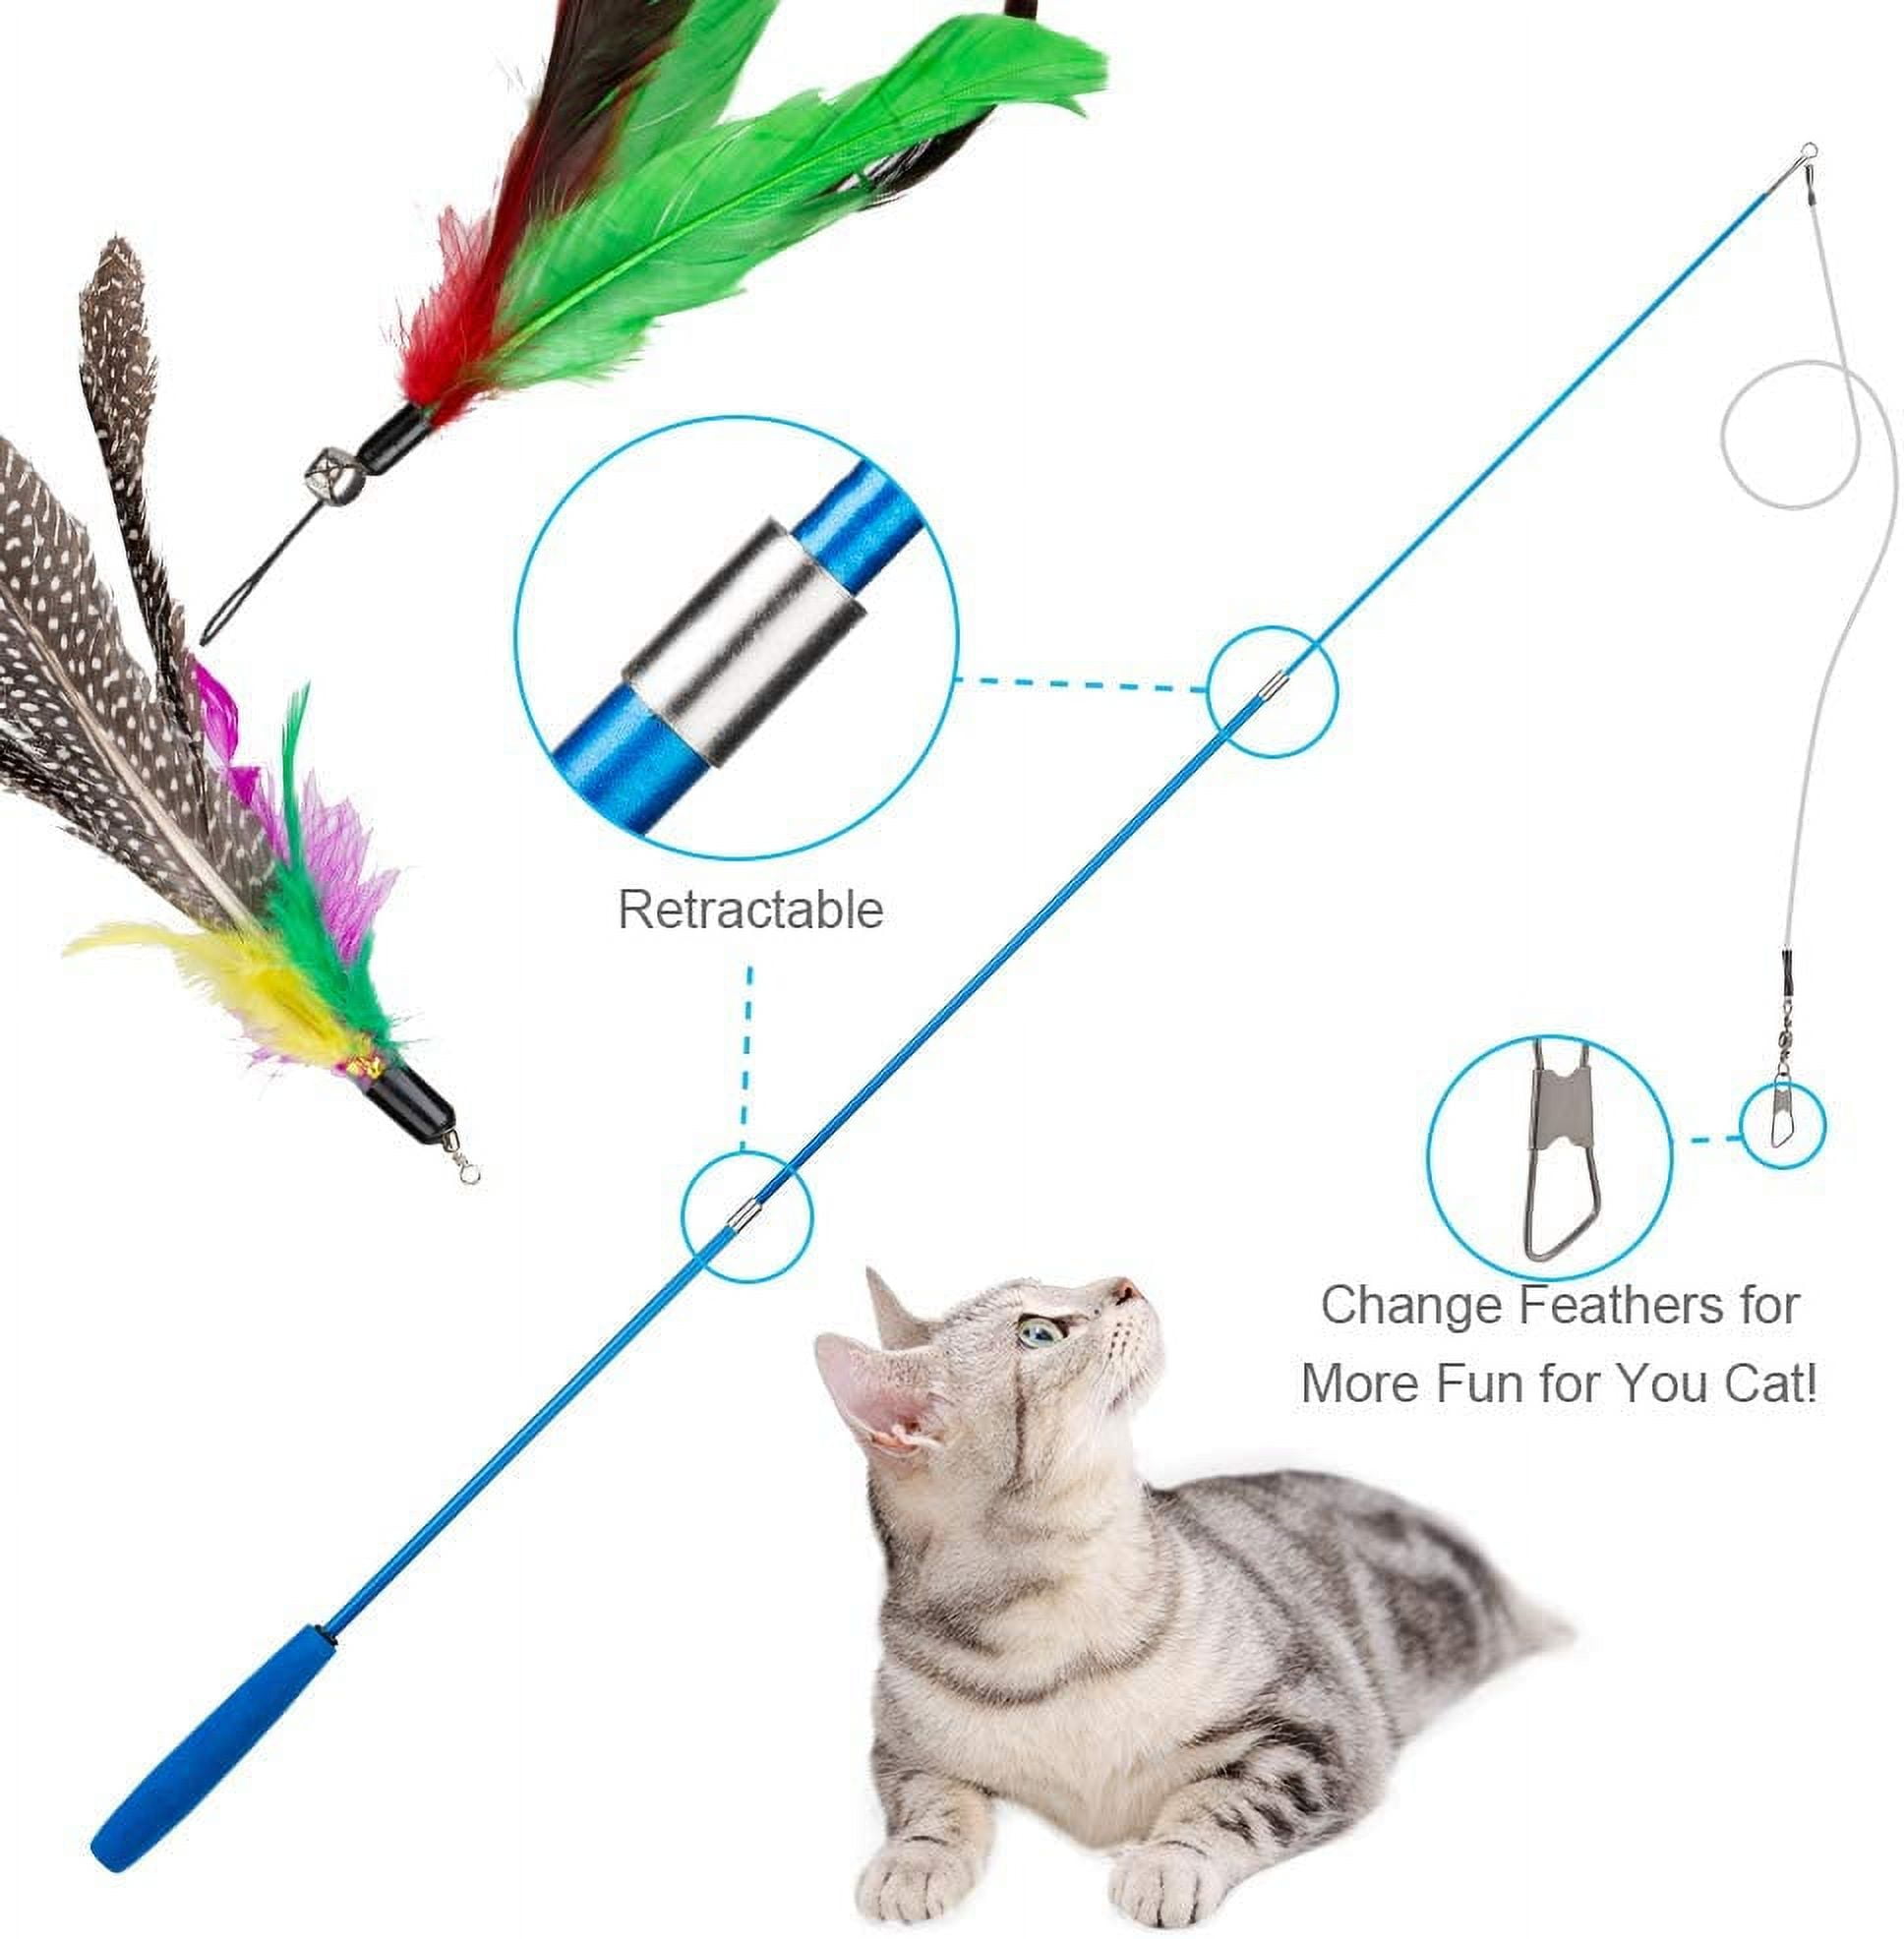  Cat Toys for Indoor Cats-Cat Feather Toy-Cat Toy with Powerful Suction  Cup Detachable-1pcs Cat Wand Toy, 3pcs Feather Replacement Bell-Exercise  Bell for Indoor Cats-Kitten Toys, Play Chase Hunt : Pet